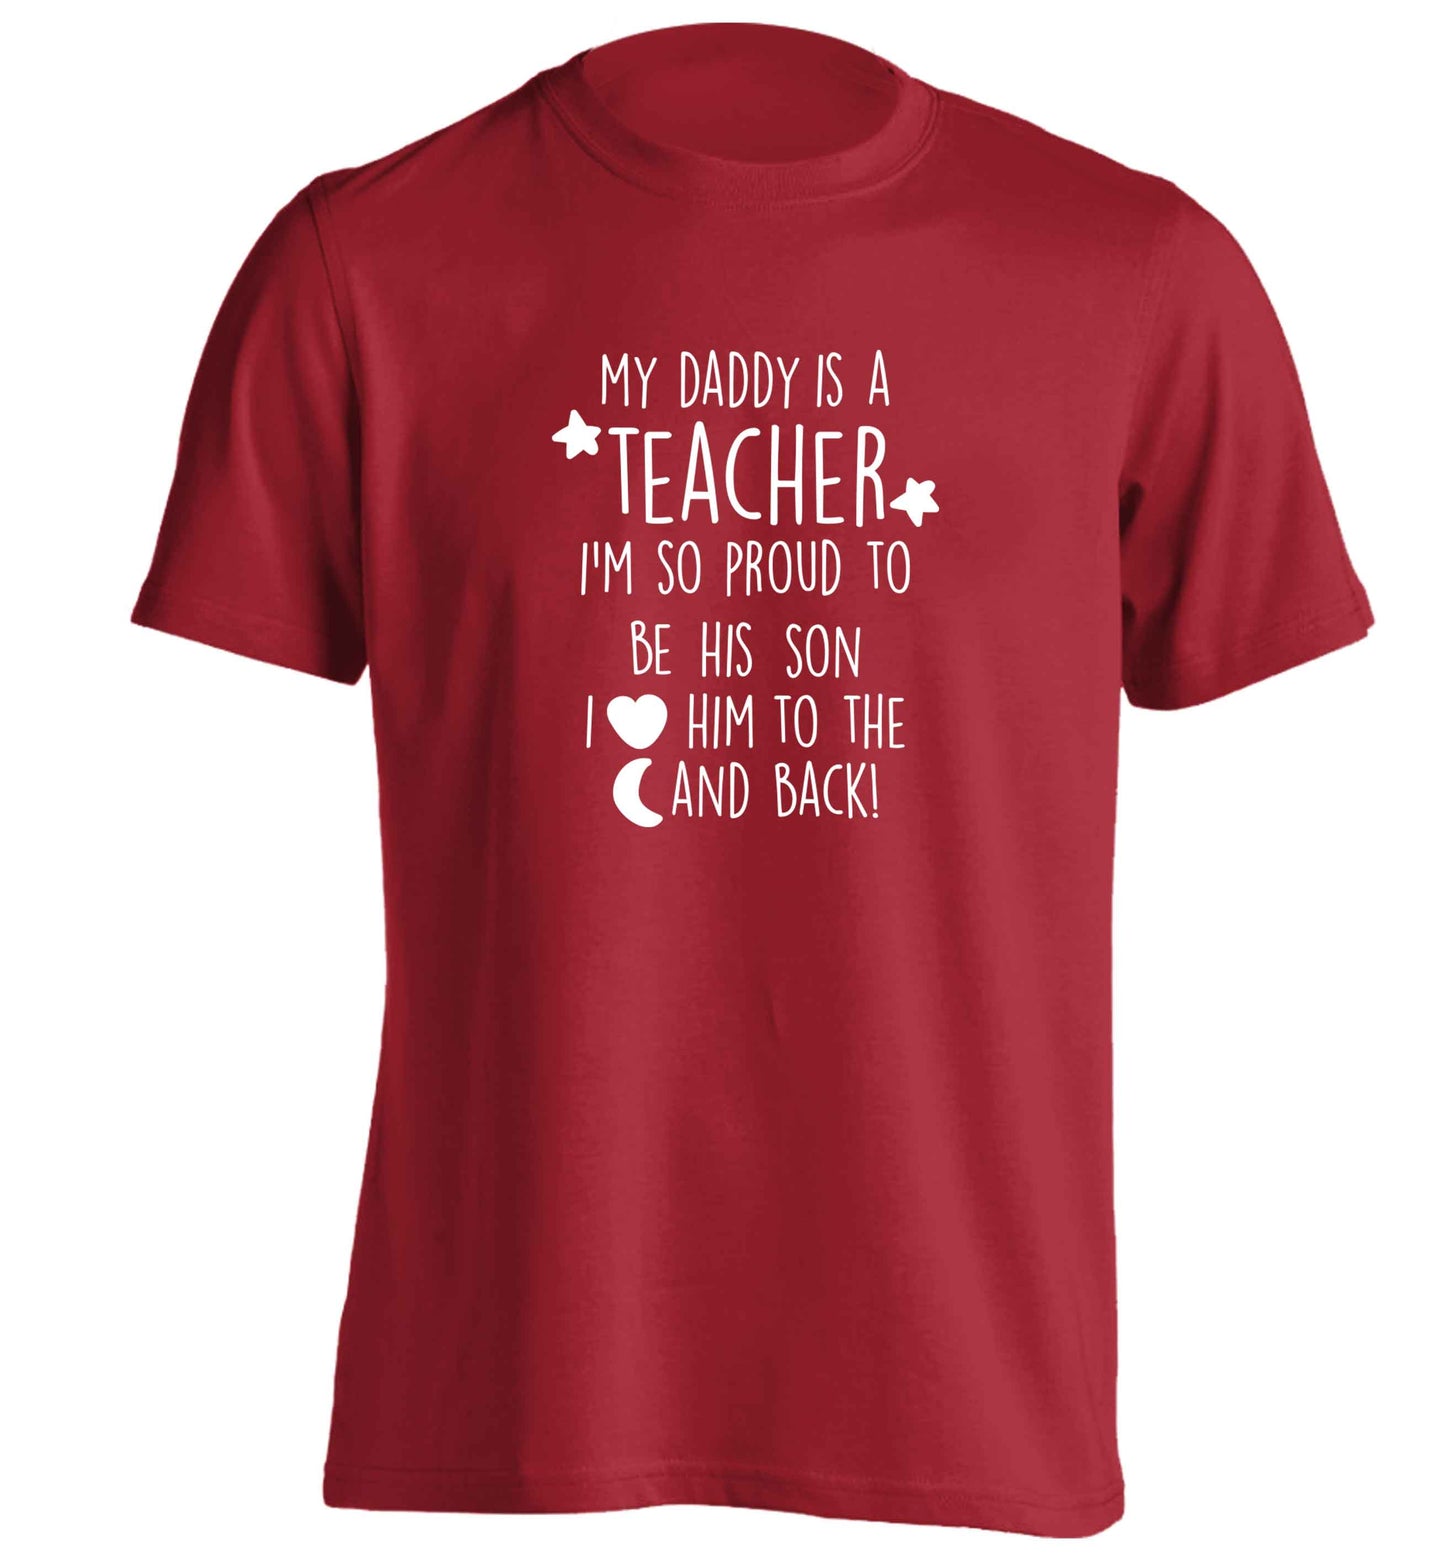 My daddy is a teacher I'm so proud to be his son I love her to the moon and back adults unisex red Tshirt 2XL